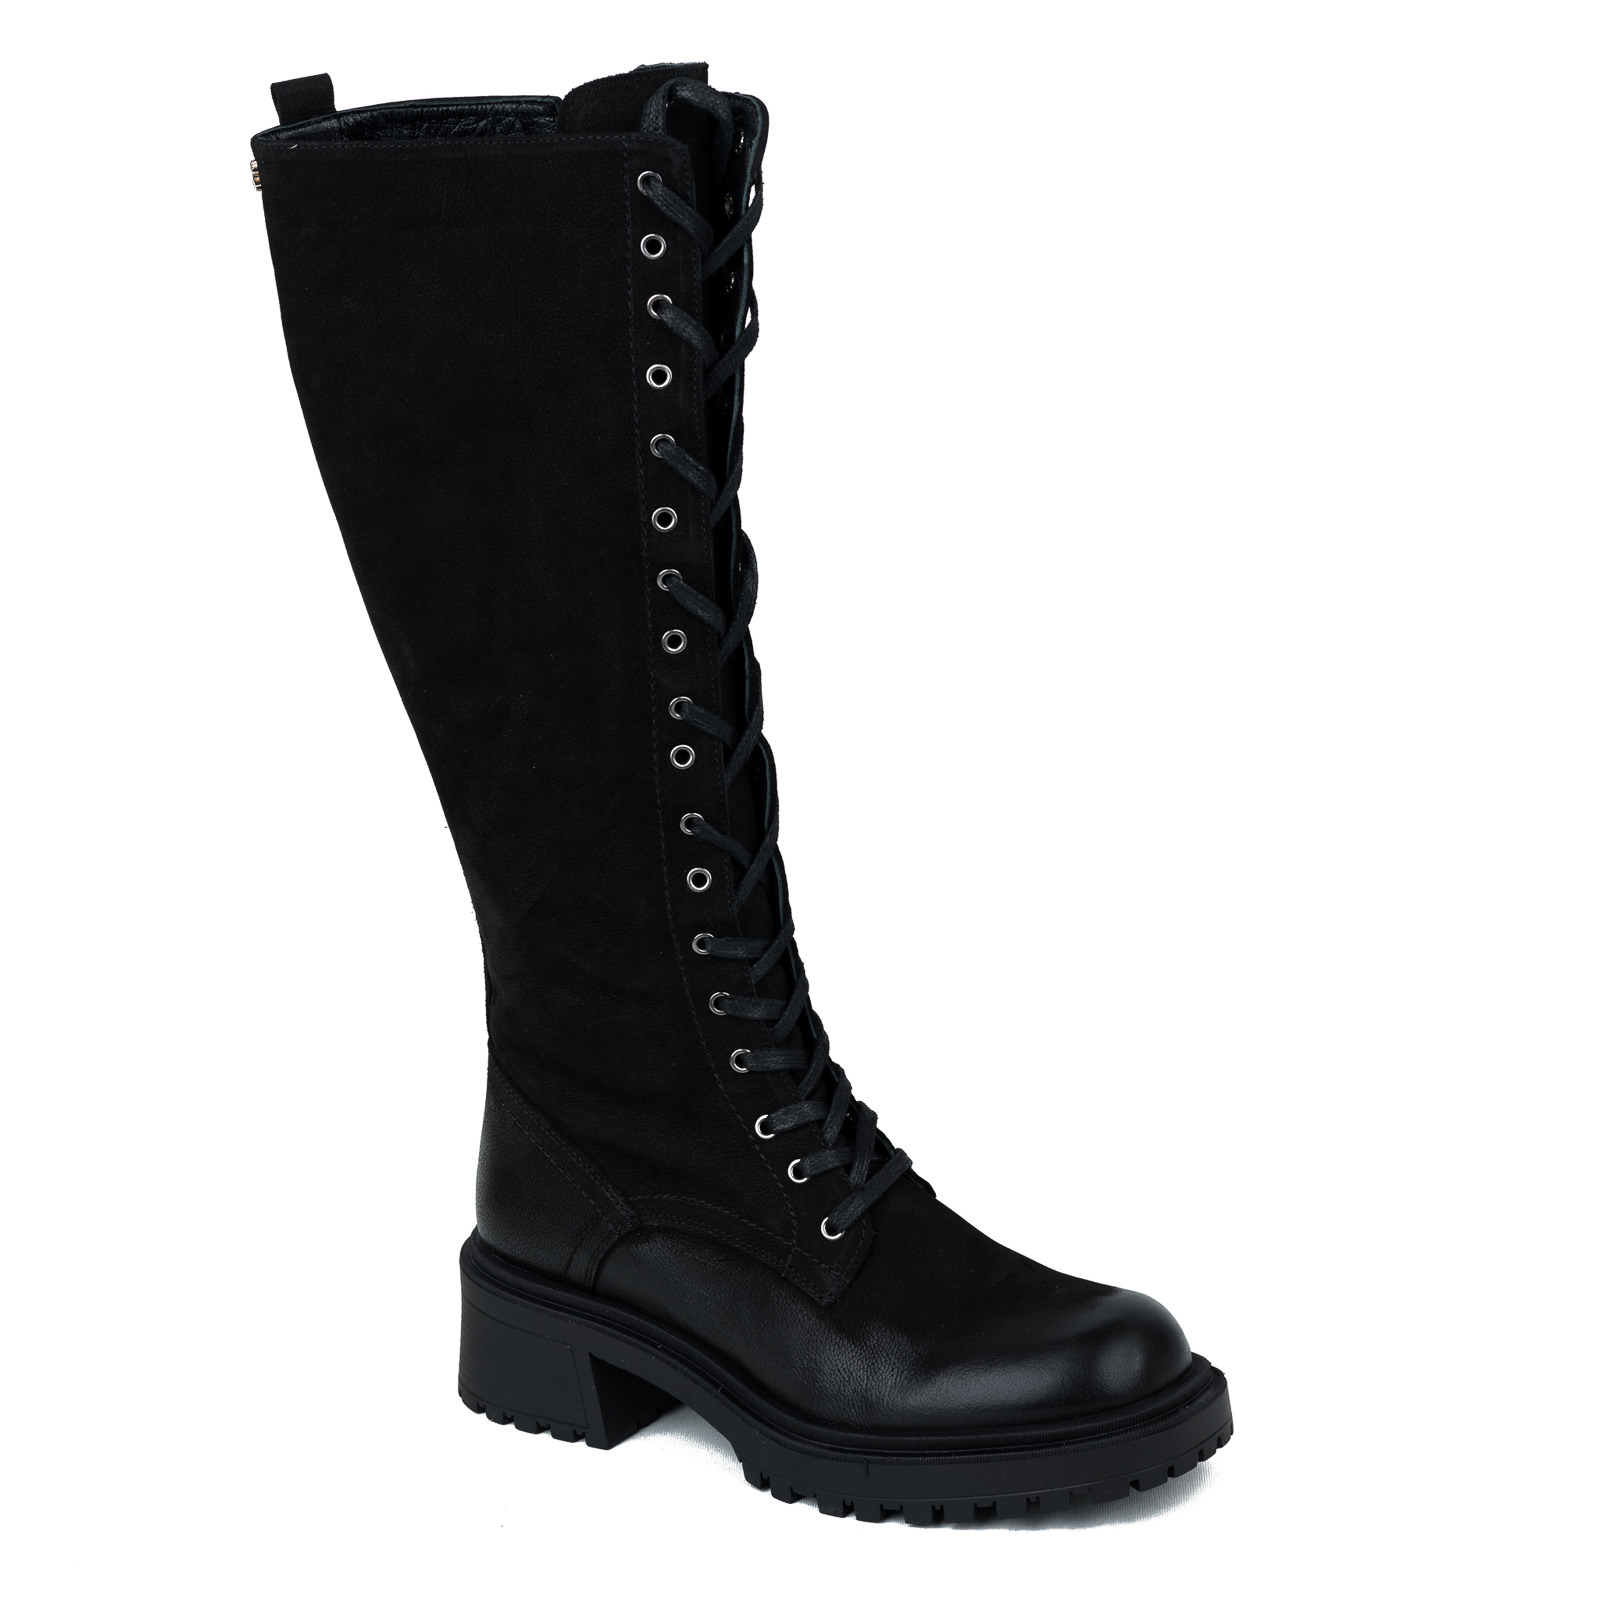 Leather boots B632 - BLACK